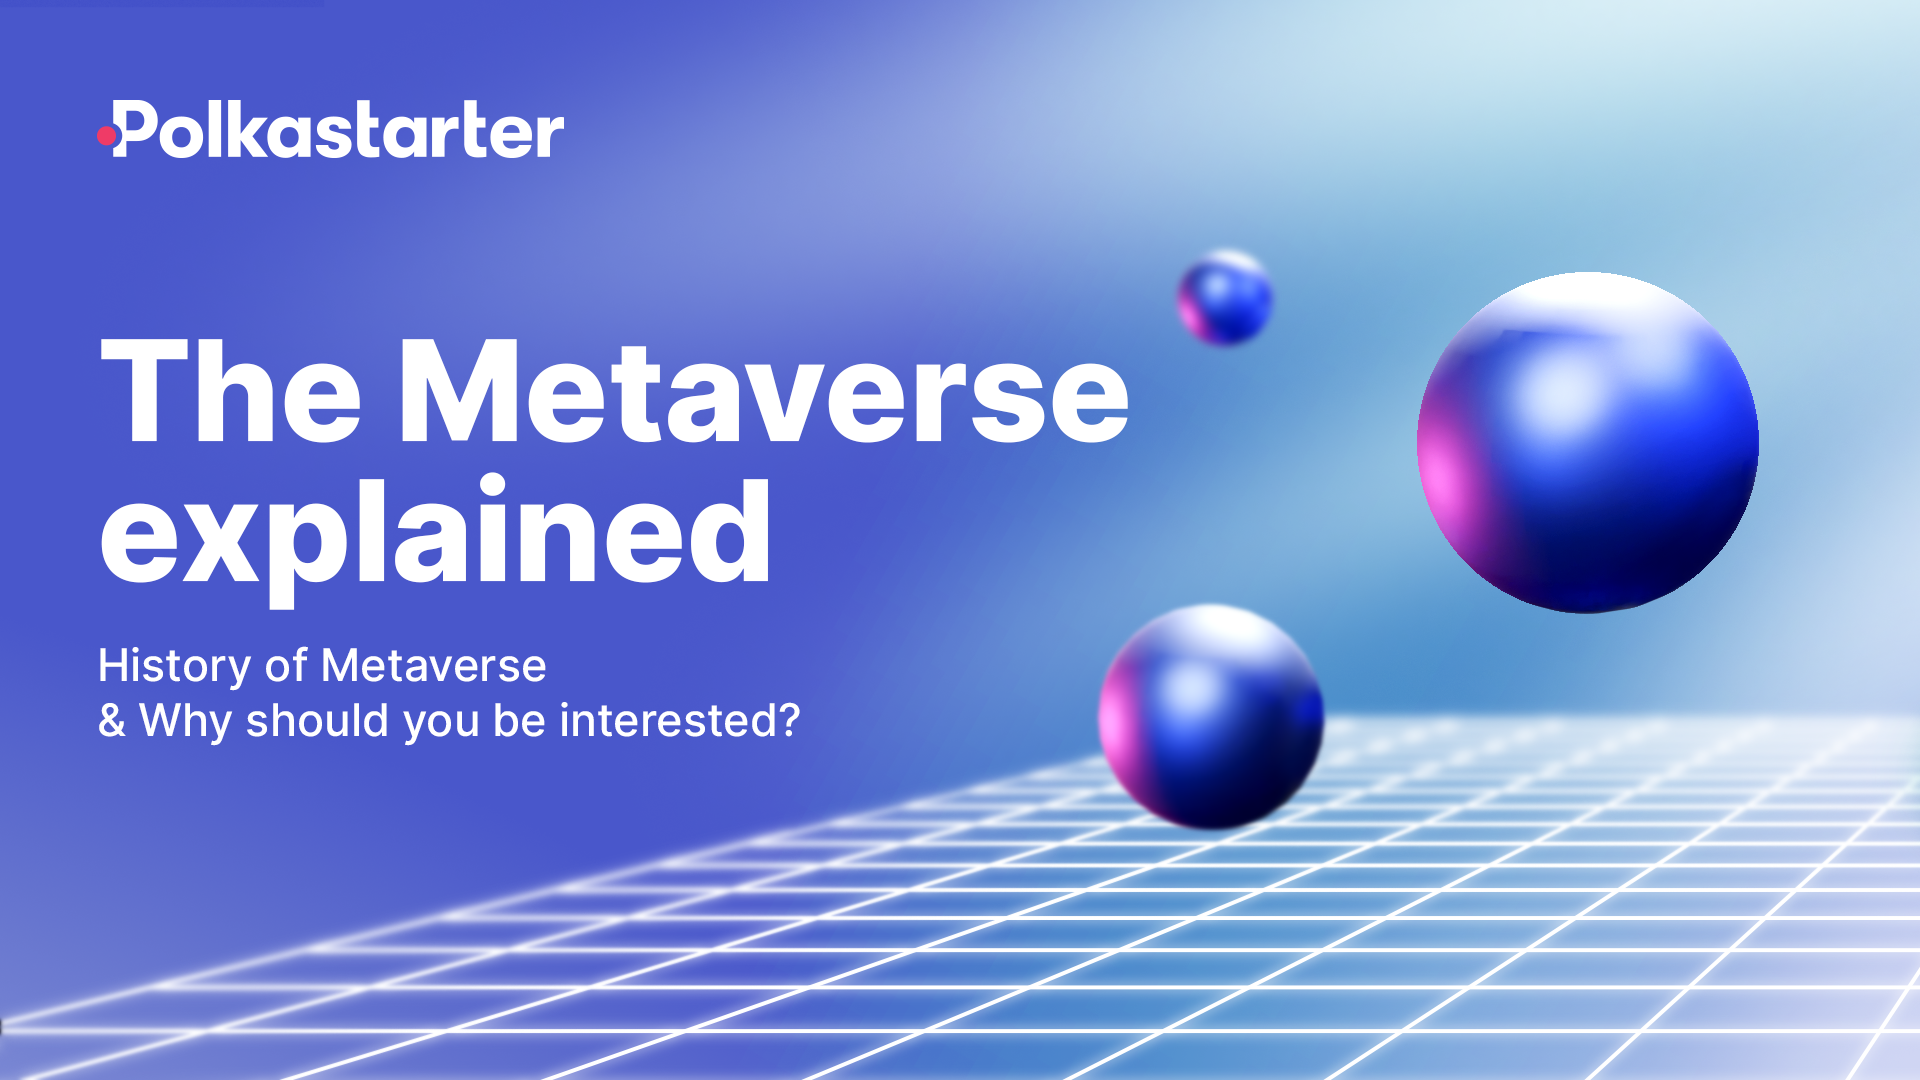 The metaverse explained